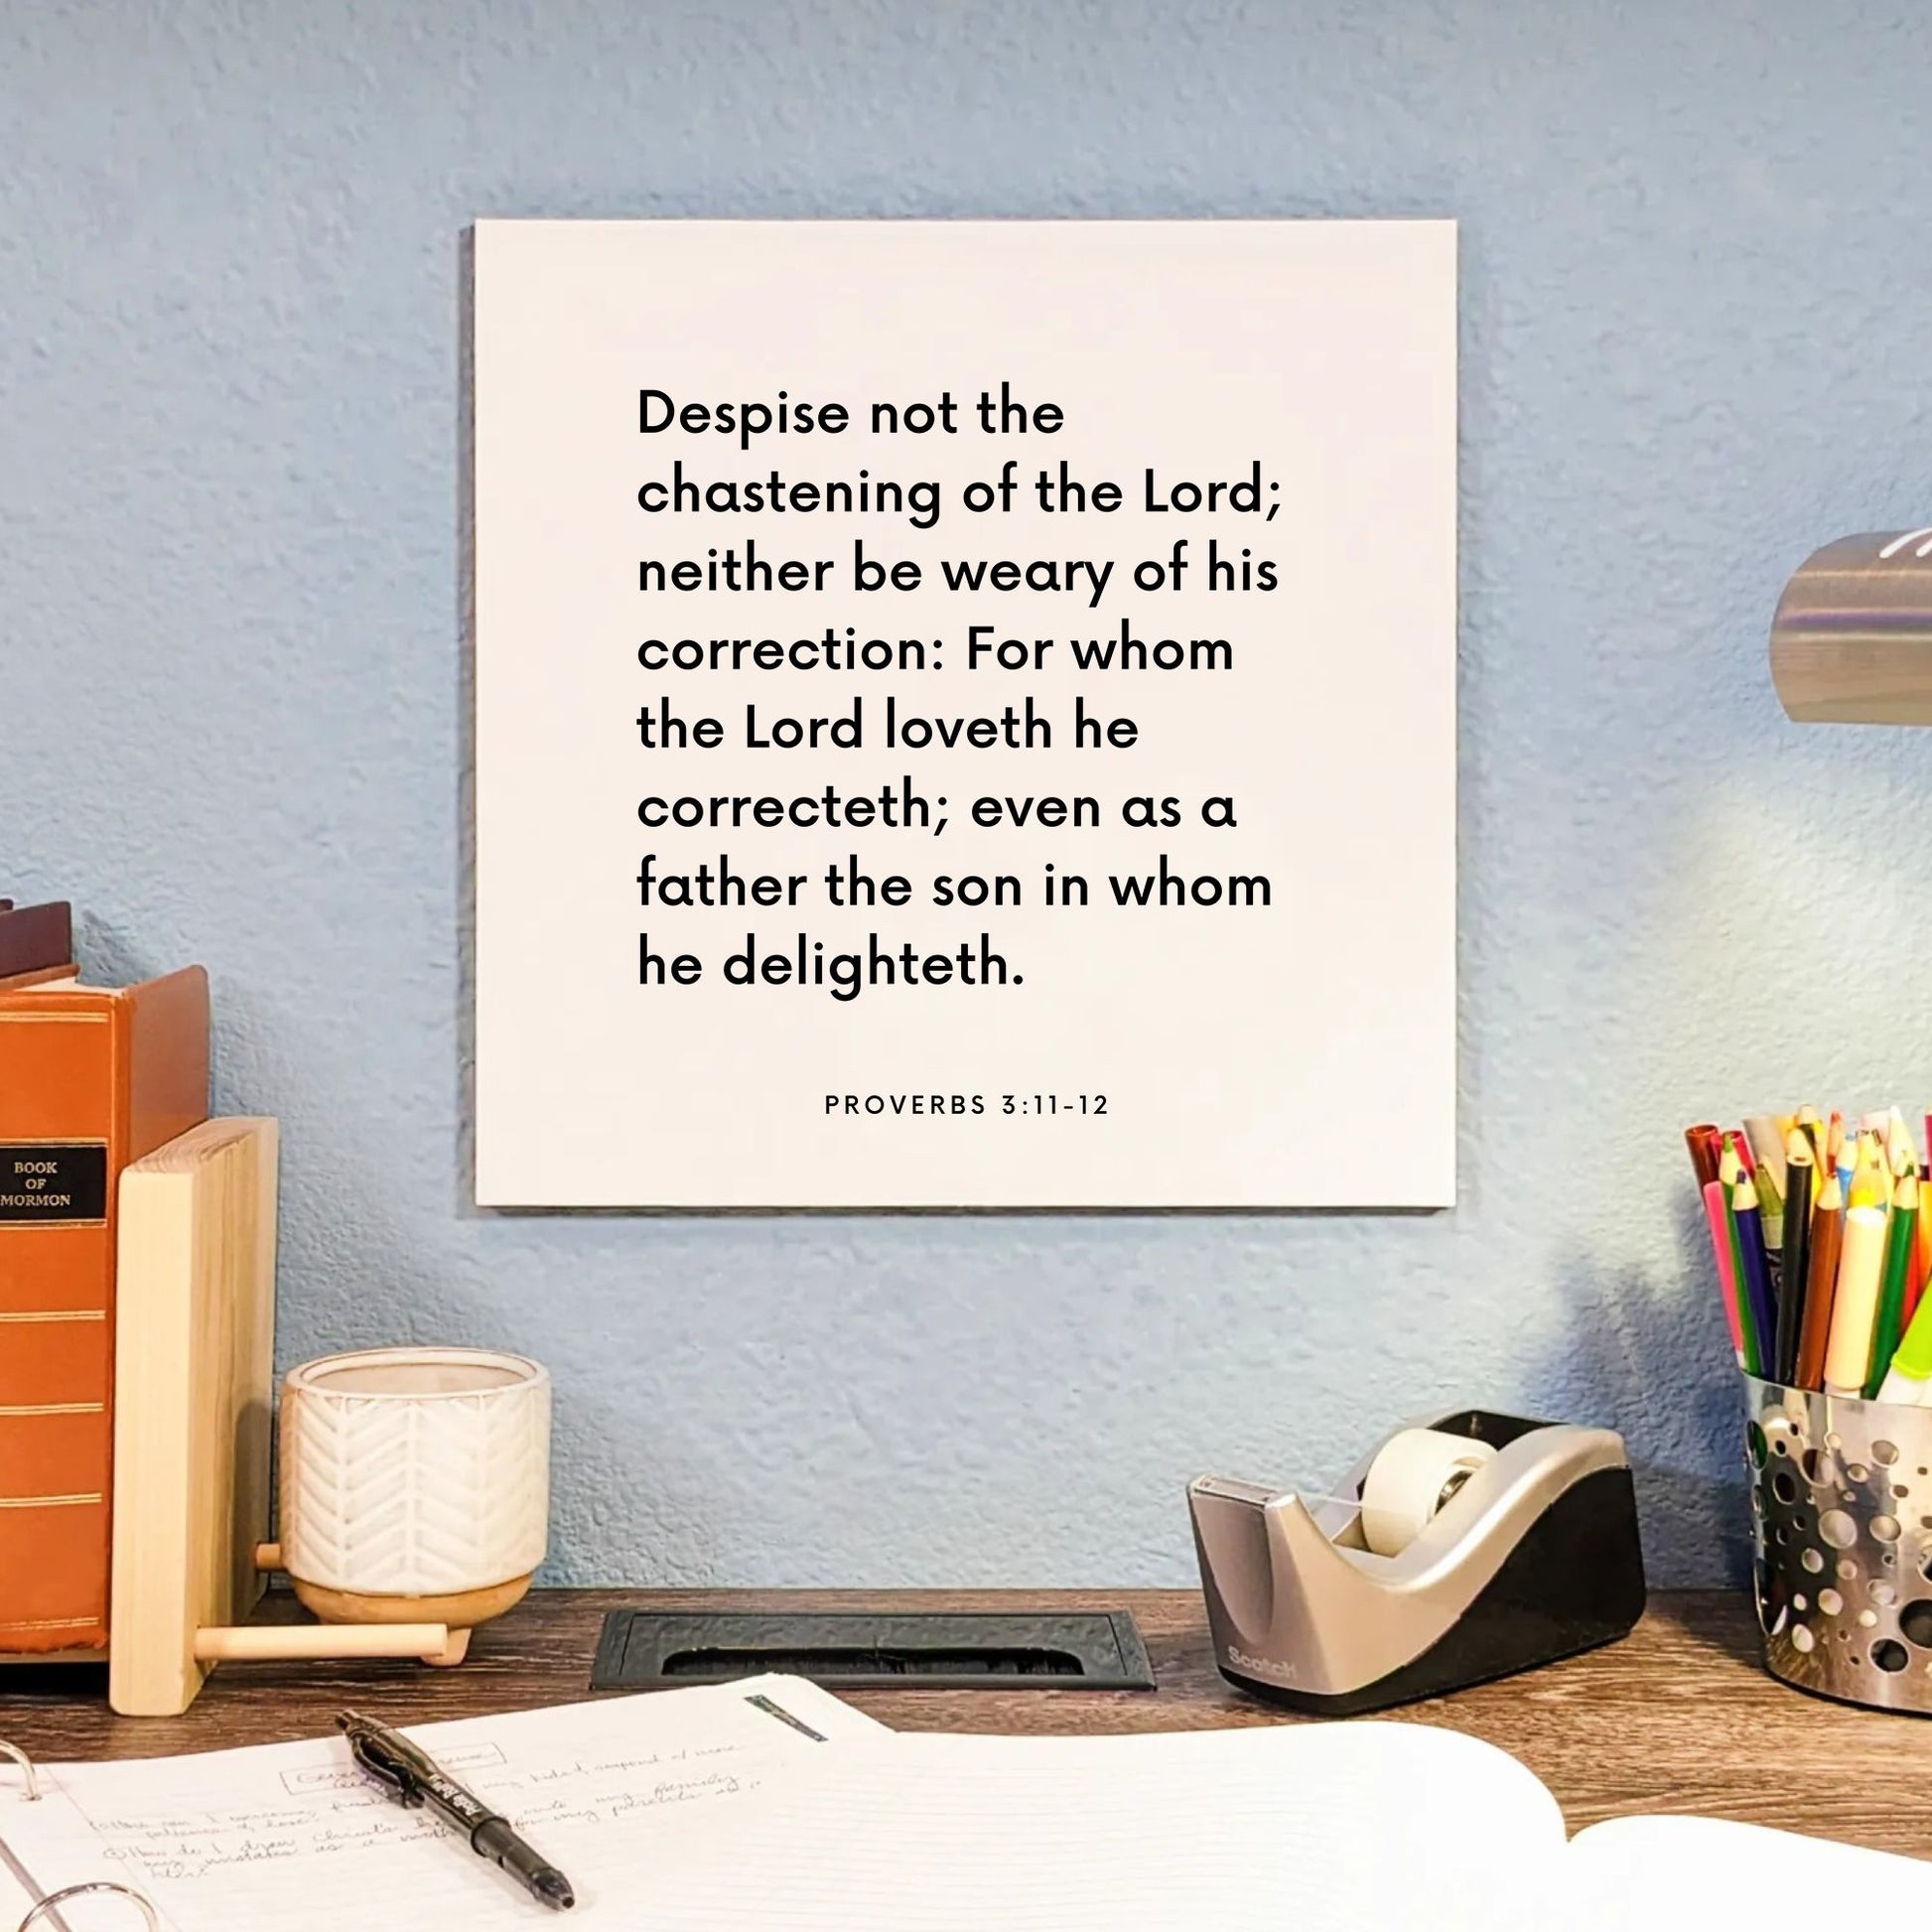 Desk mouting of the scripture tile for Proverbs 3:11-12 - "Despise not the chastening of the Lord"